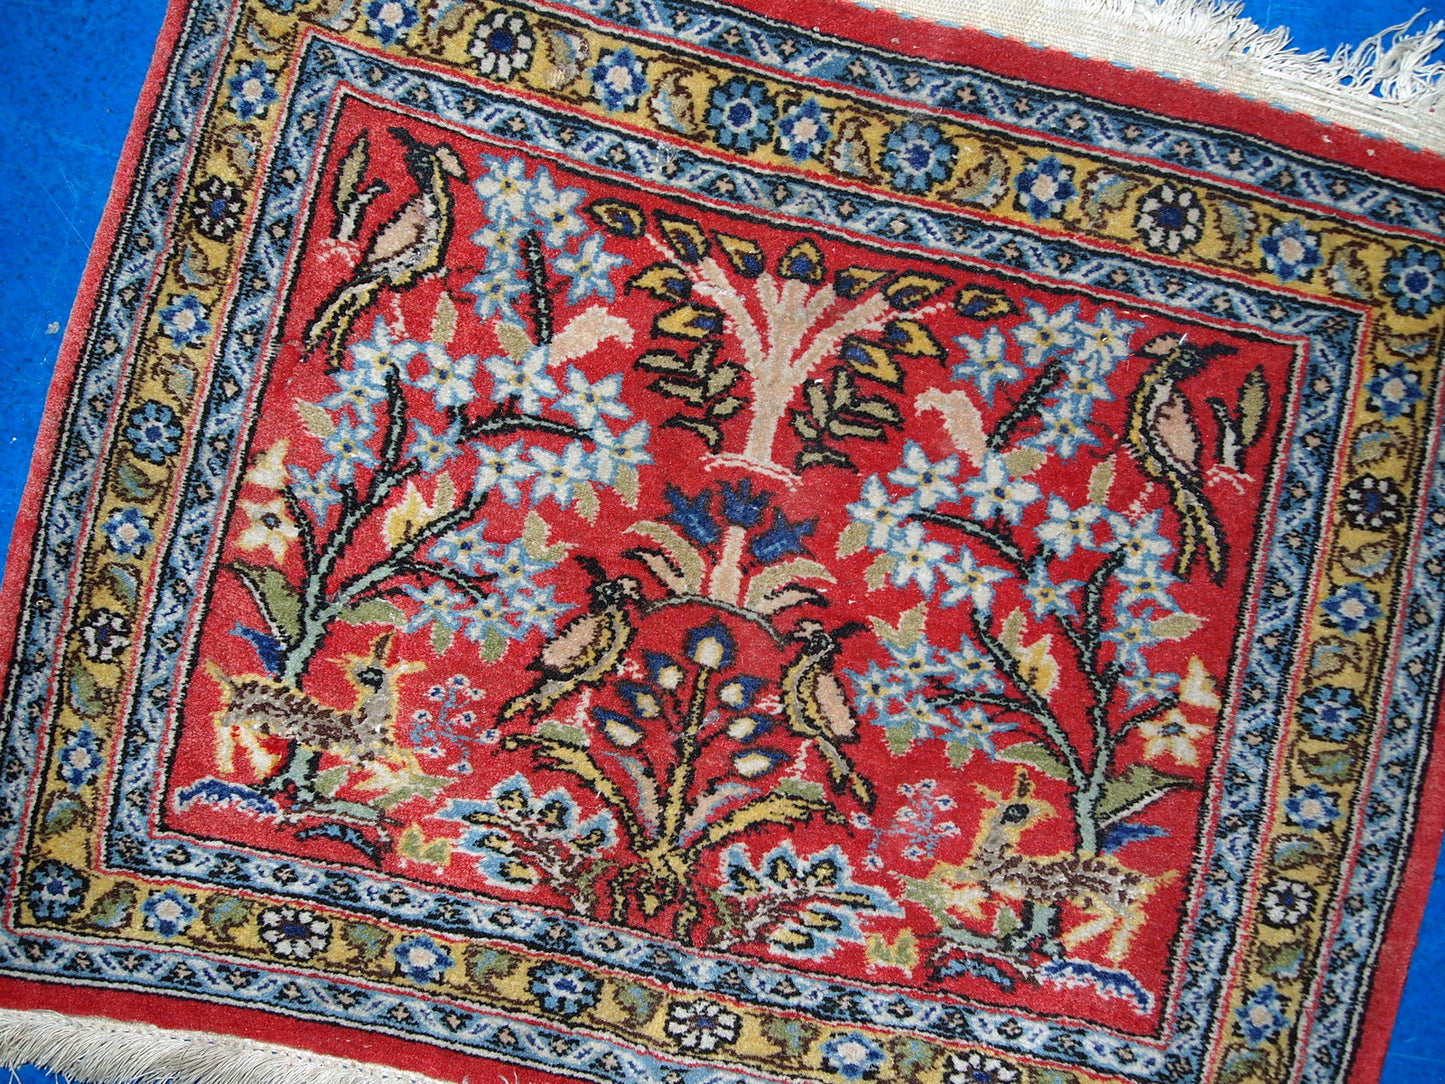 Vintage Persian Tabriz mat in original good condition. This rug made in red, sky blue and yellow wool.